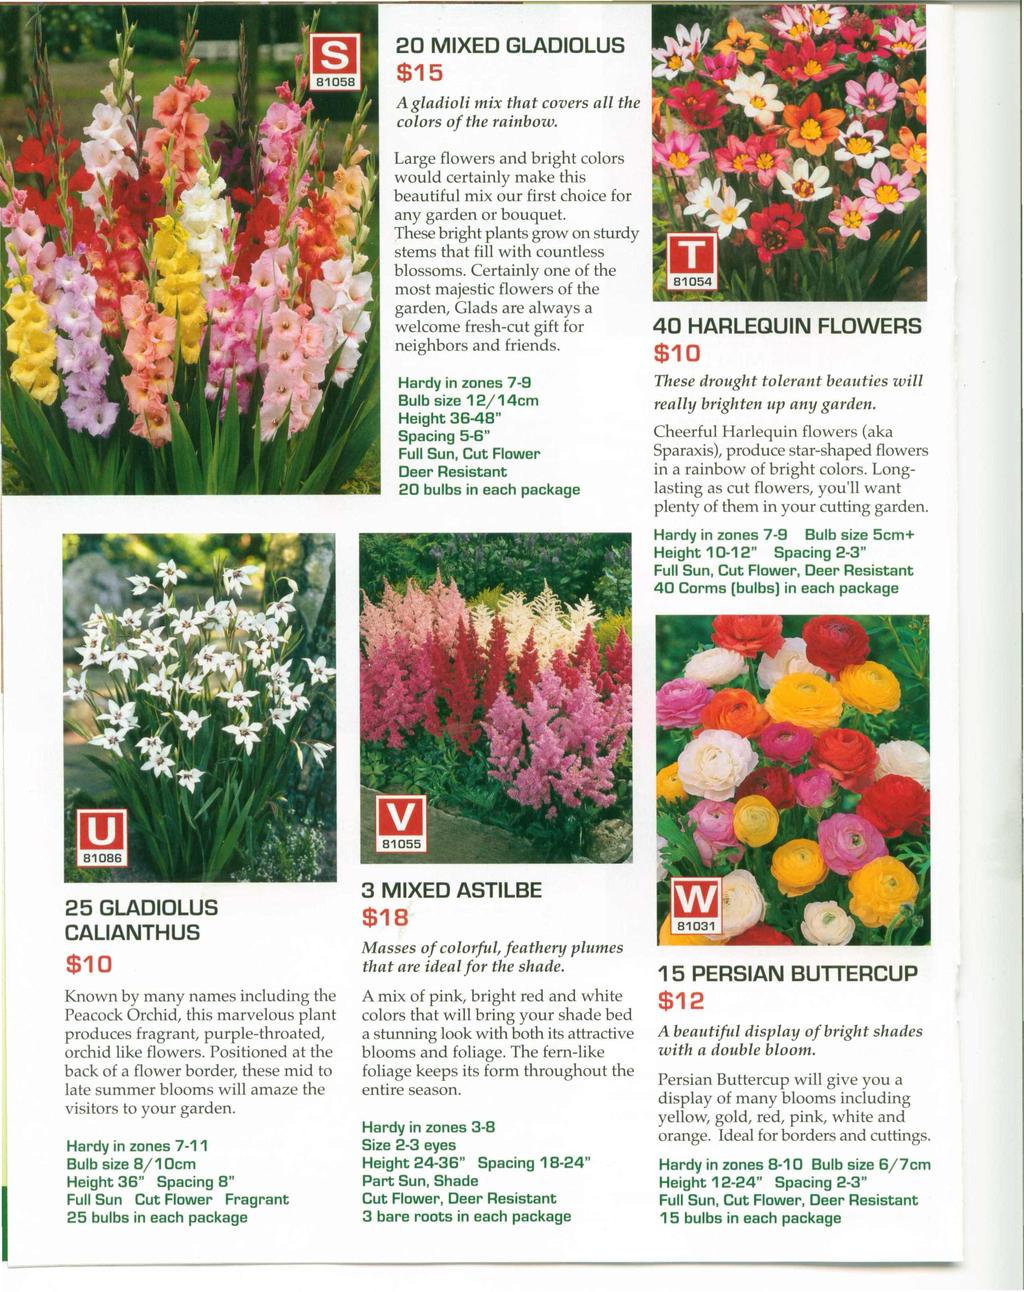 20 MIXED GLADIOLUS $15 A gladioli mix that covers all the colors of the rainbow. Large flowers and bright colors would certainly make this beautiful mix our first choice for any garden or bouquet.